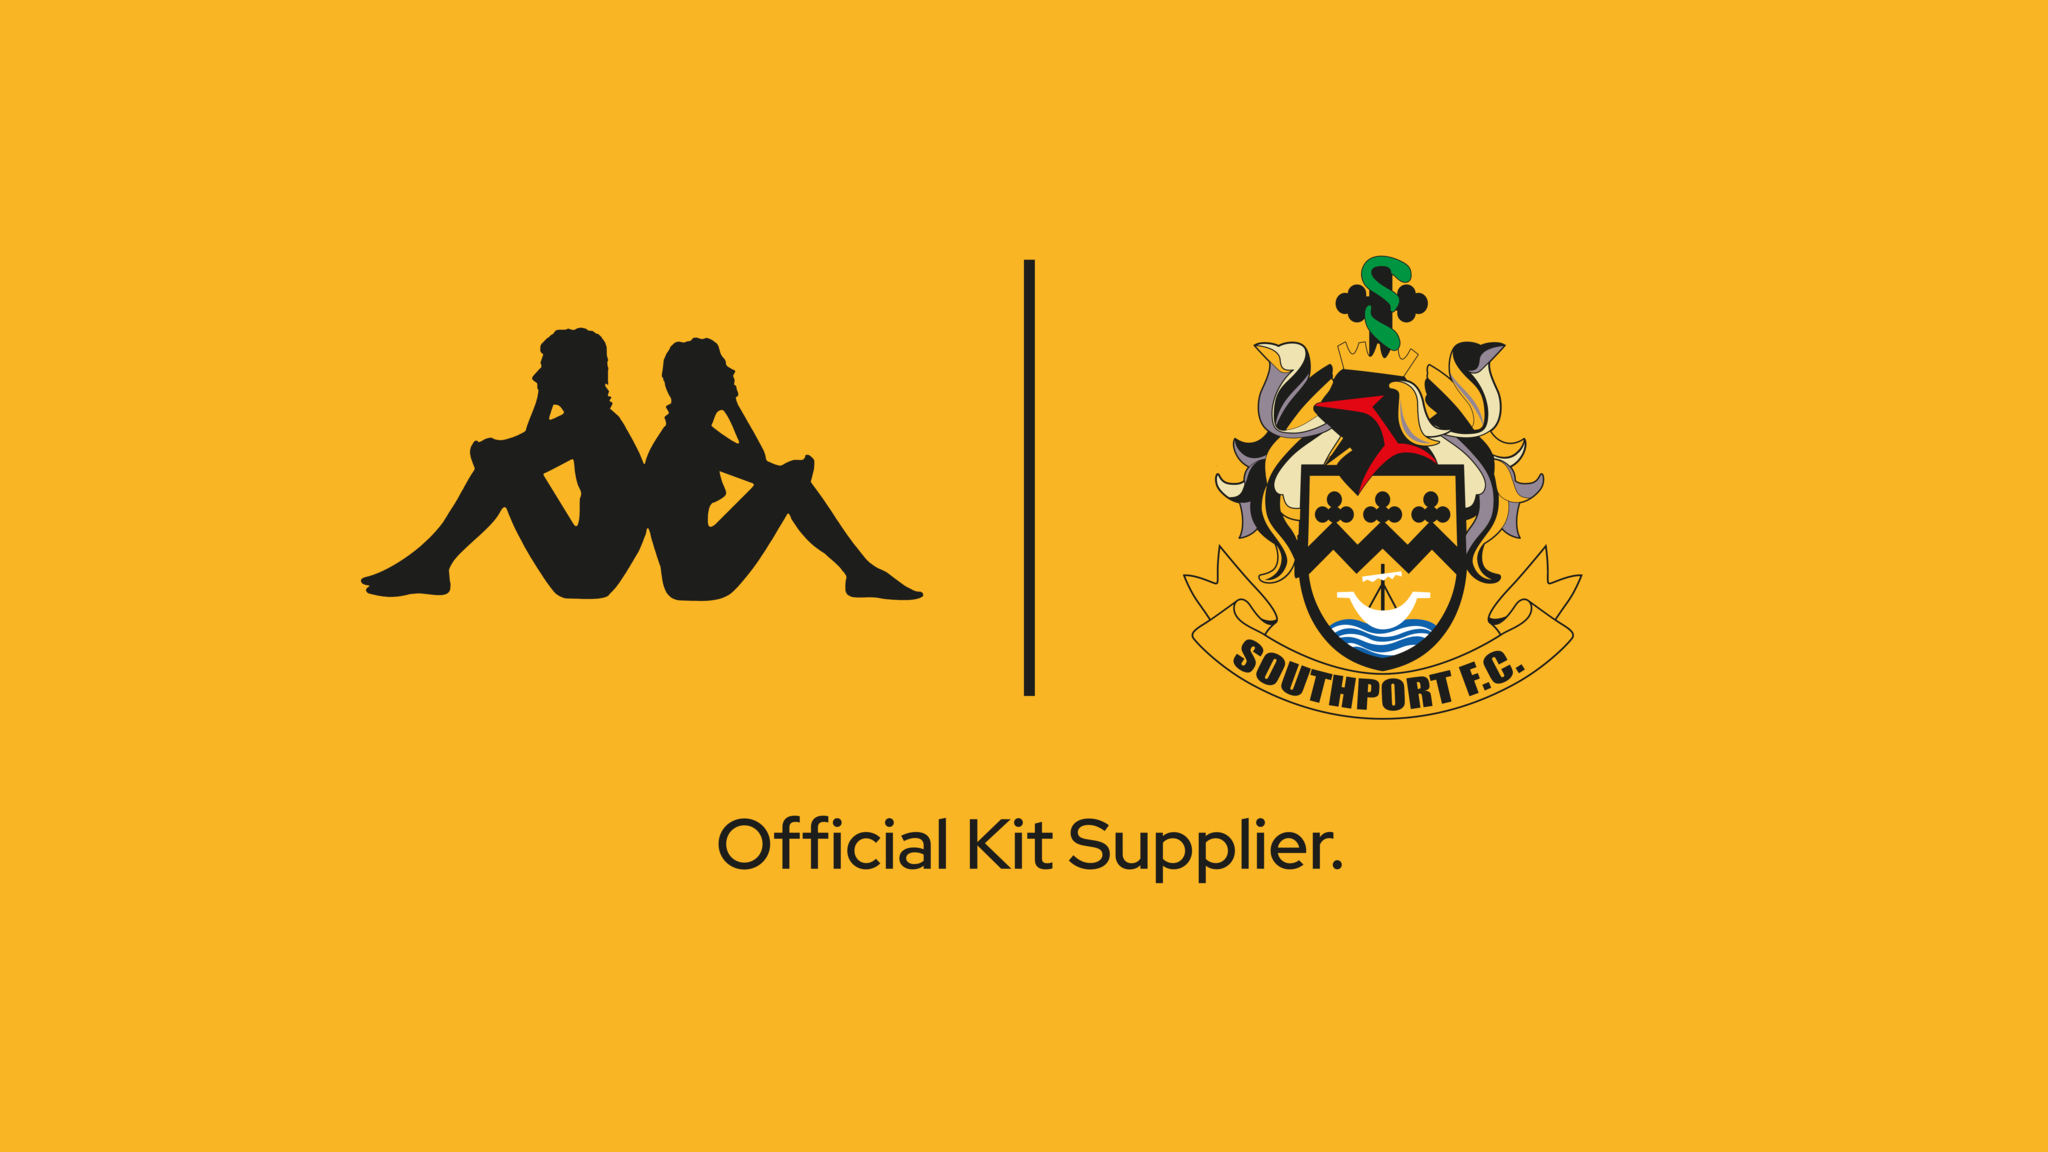 Kappa x Southport FC Logos - Official Kit Supplier